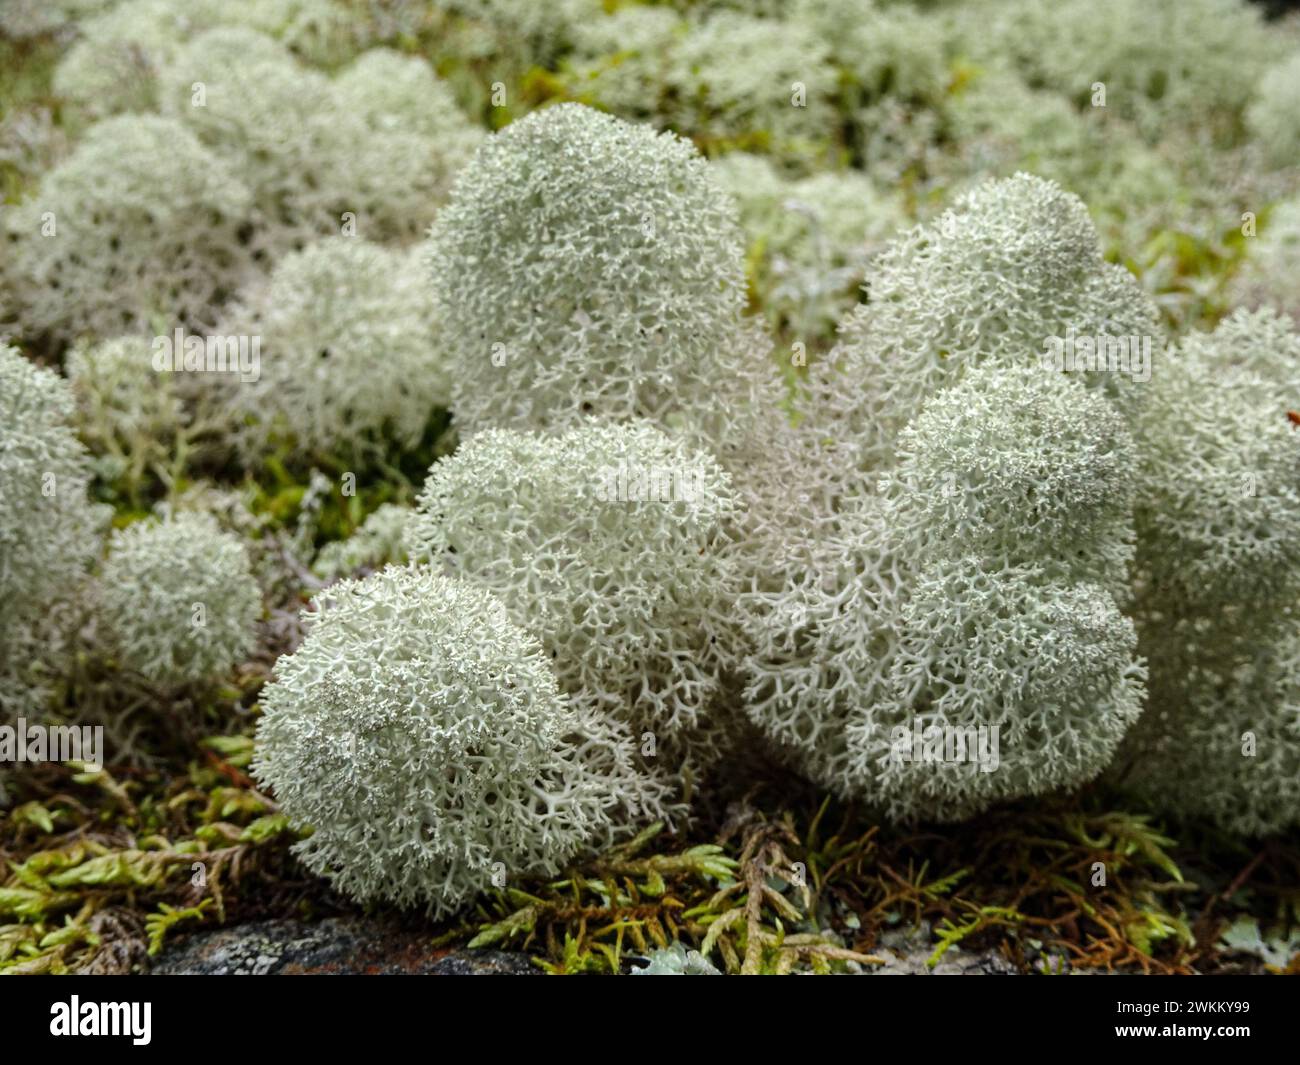 Star-tipped cup lichen (Cladonia stellaris) close-up. White reindeer moss Stock Photo